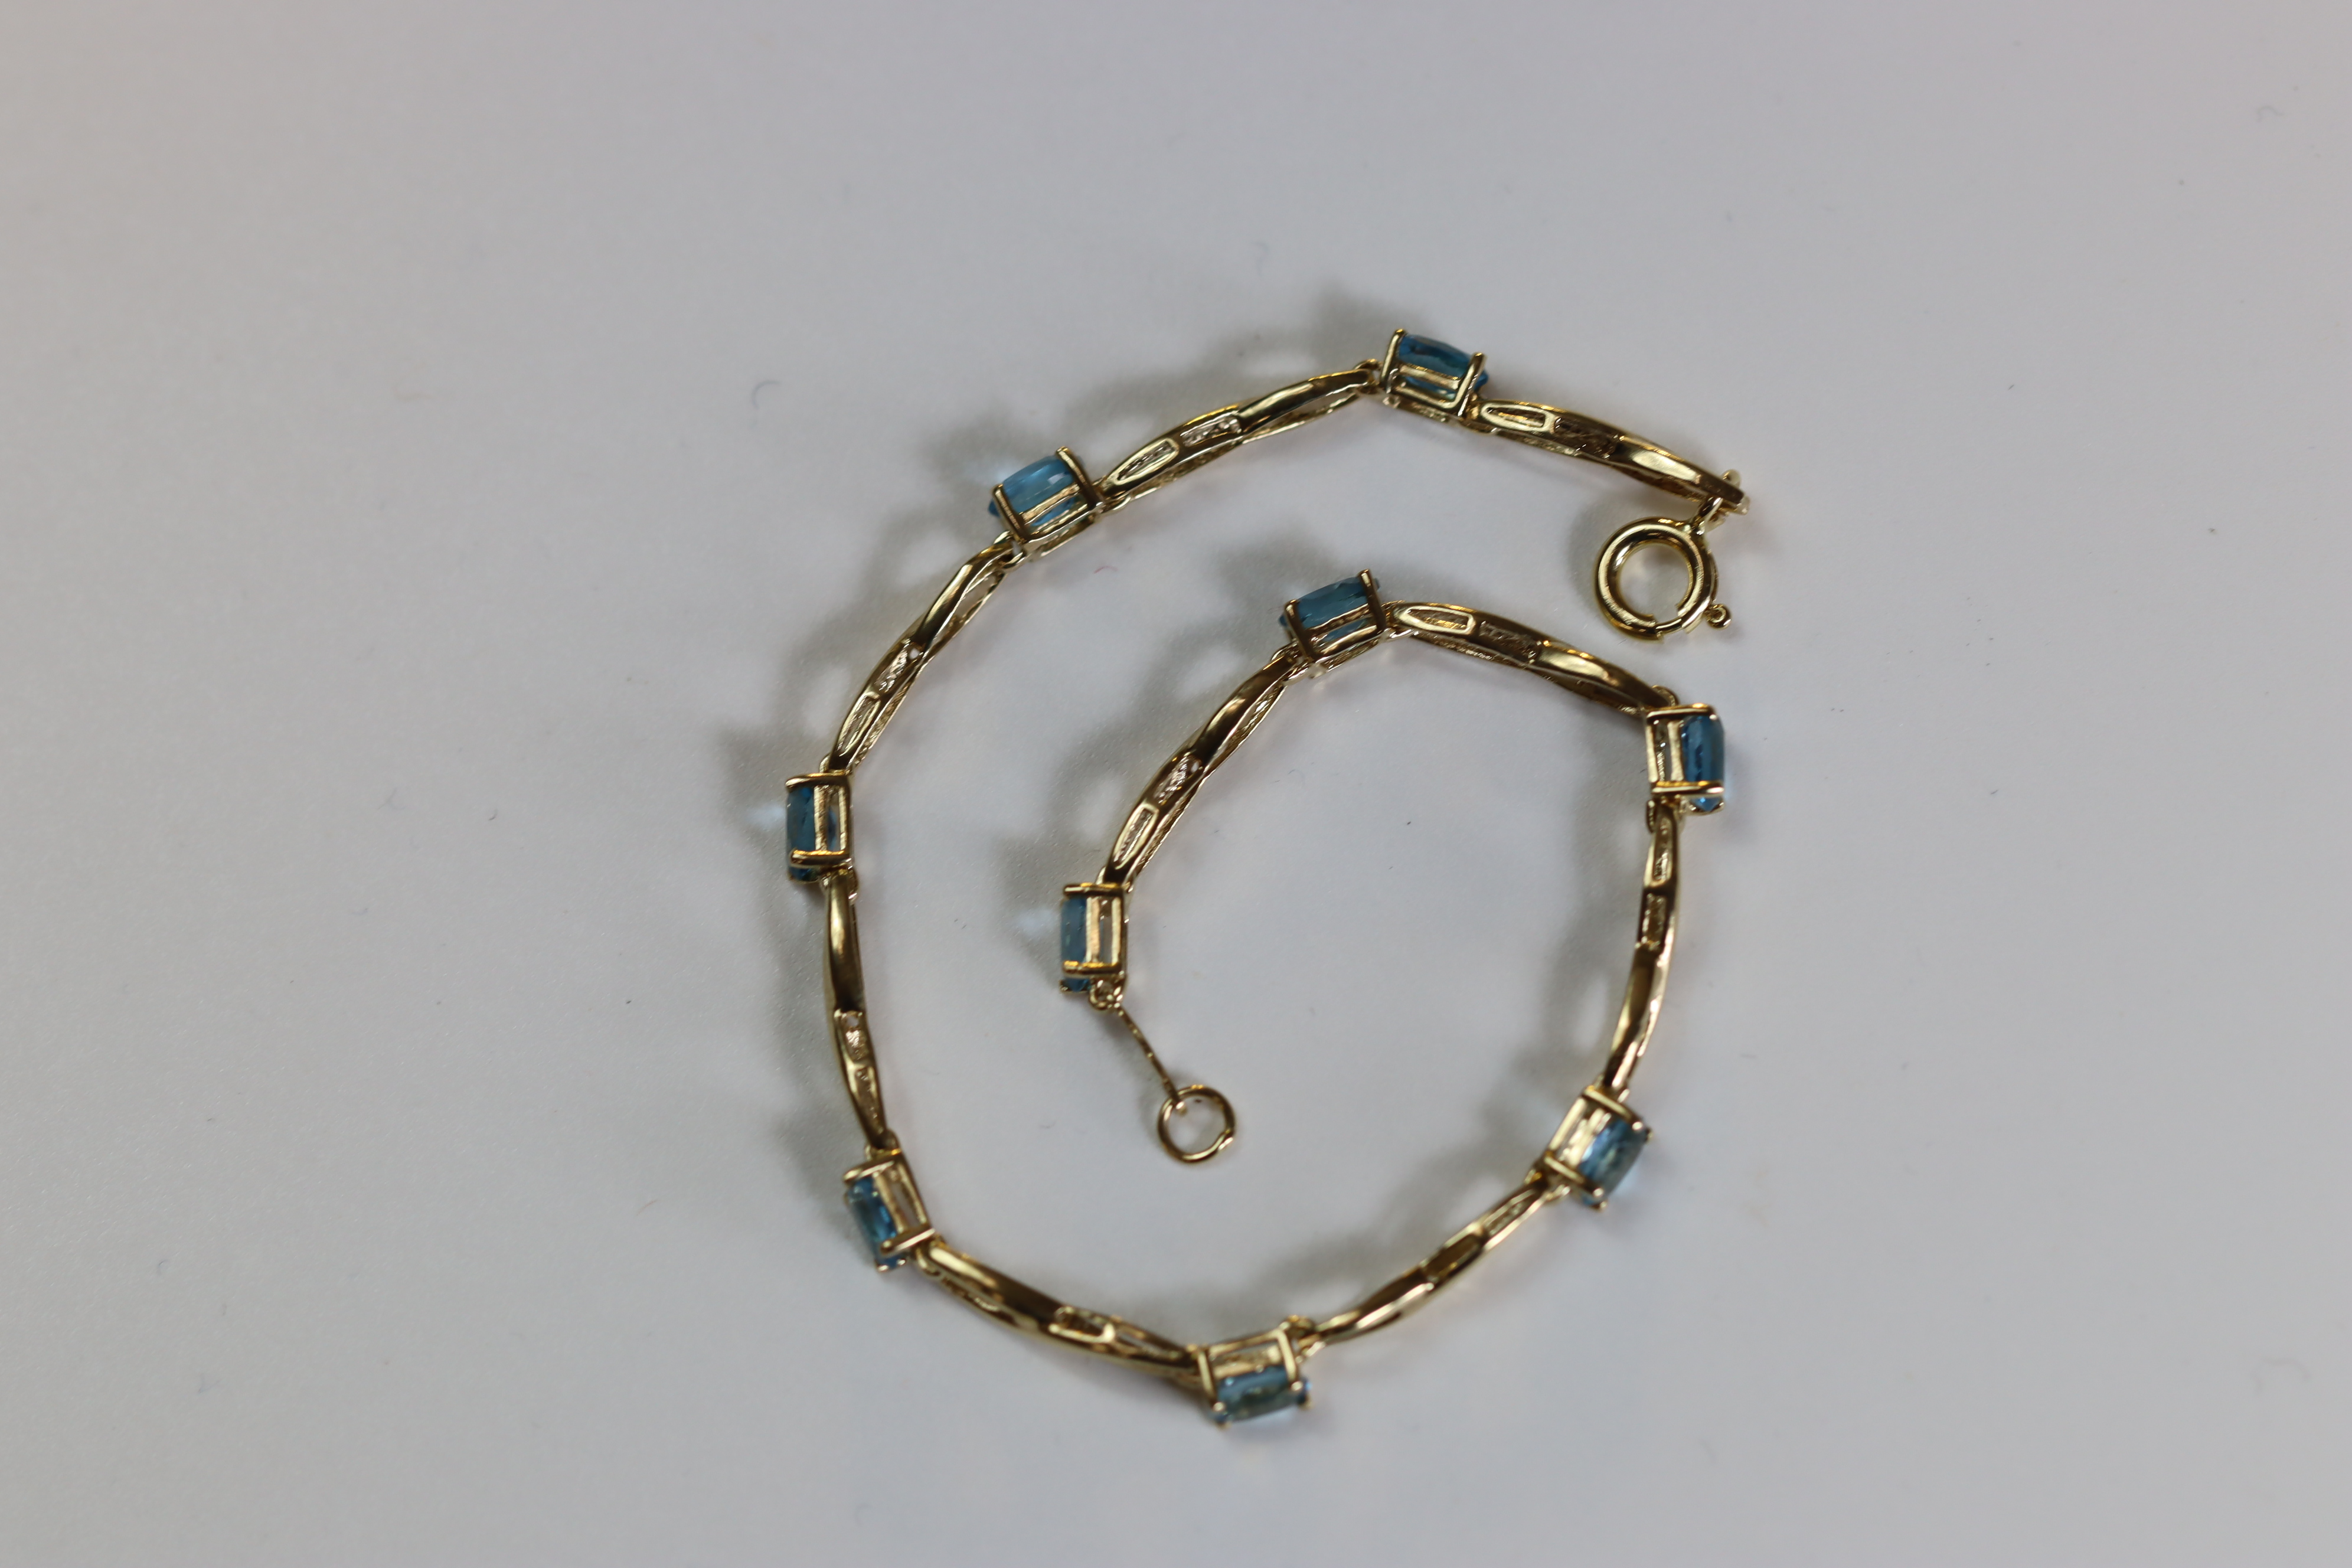 A Blue Topaz and Yellow Metal Line Bracelet A Blue Topaz and Yellow Metal Line Bracelet, set with - Image 8 of 8